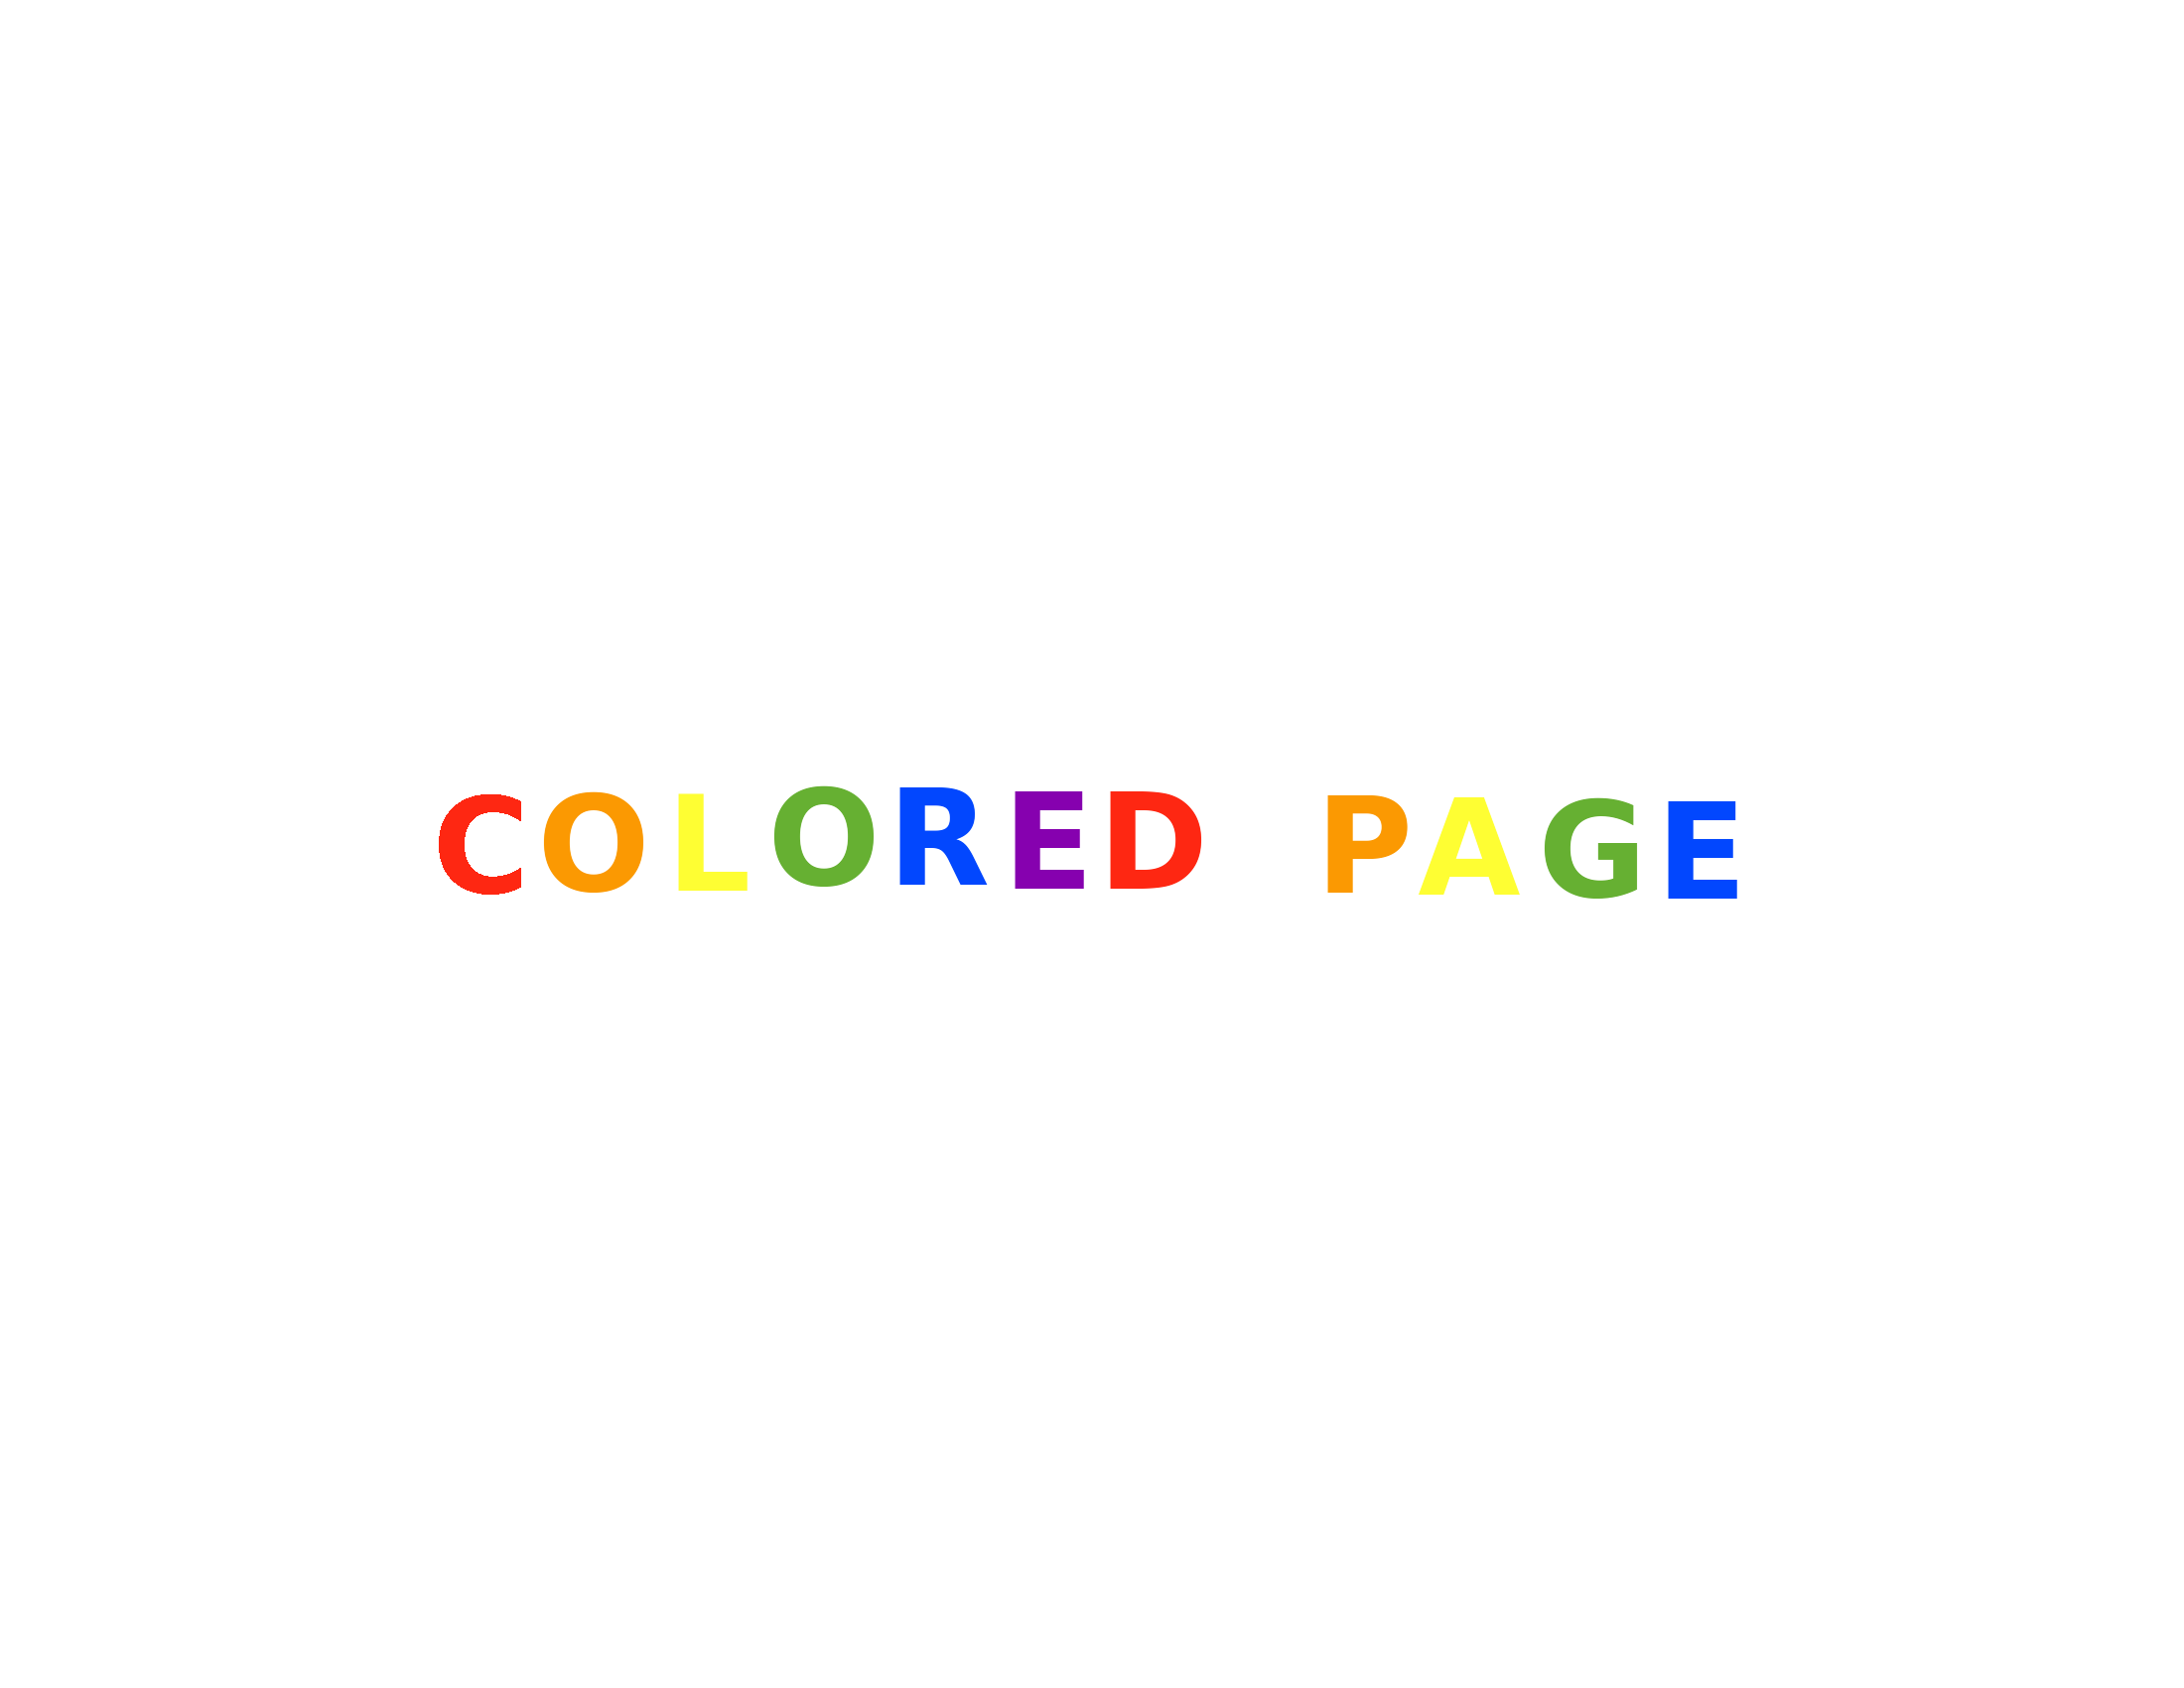 Insert colored page button